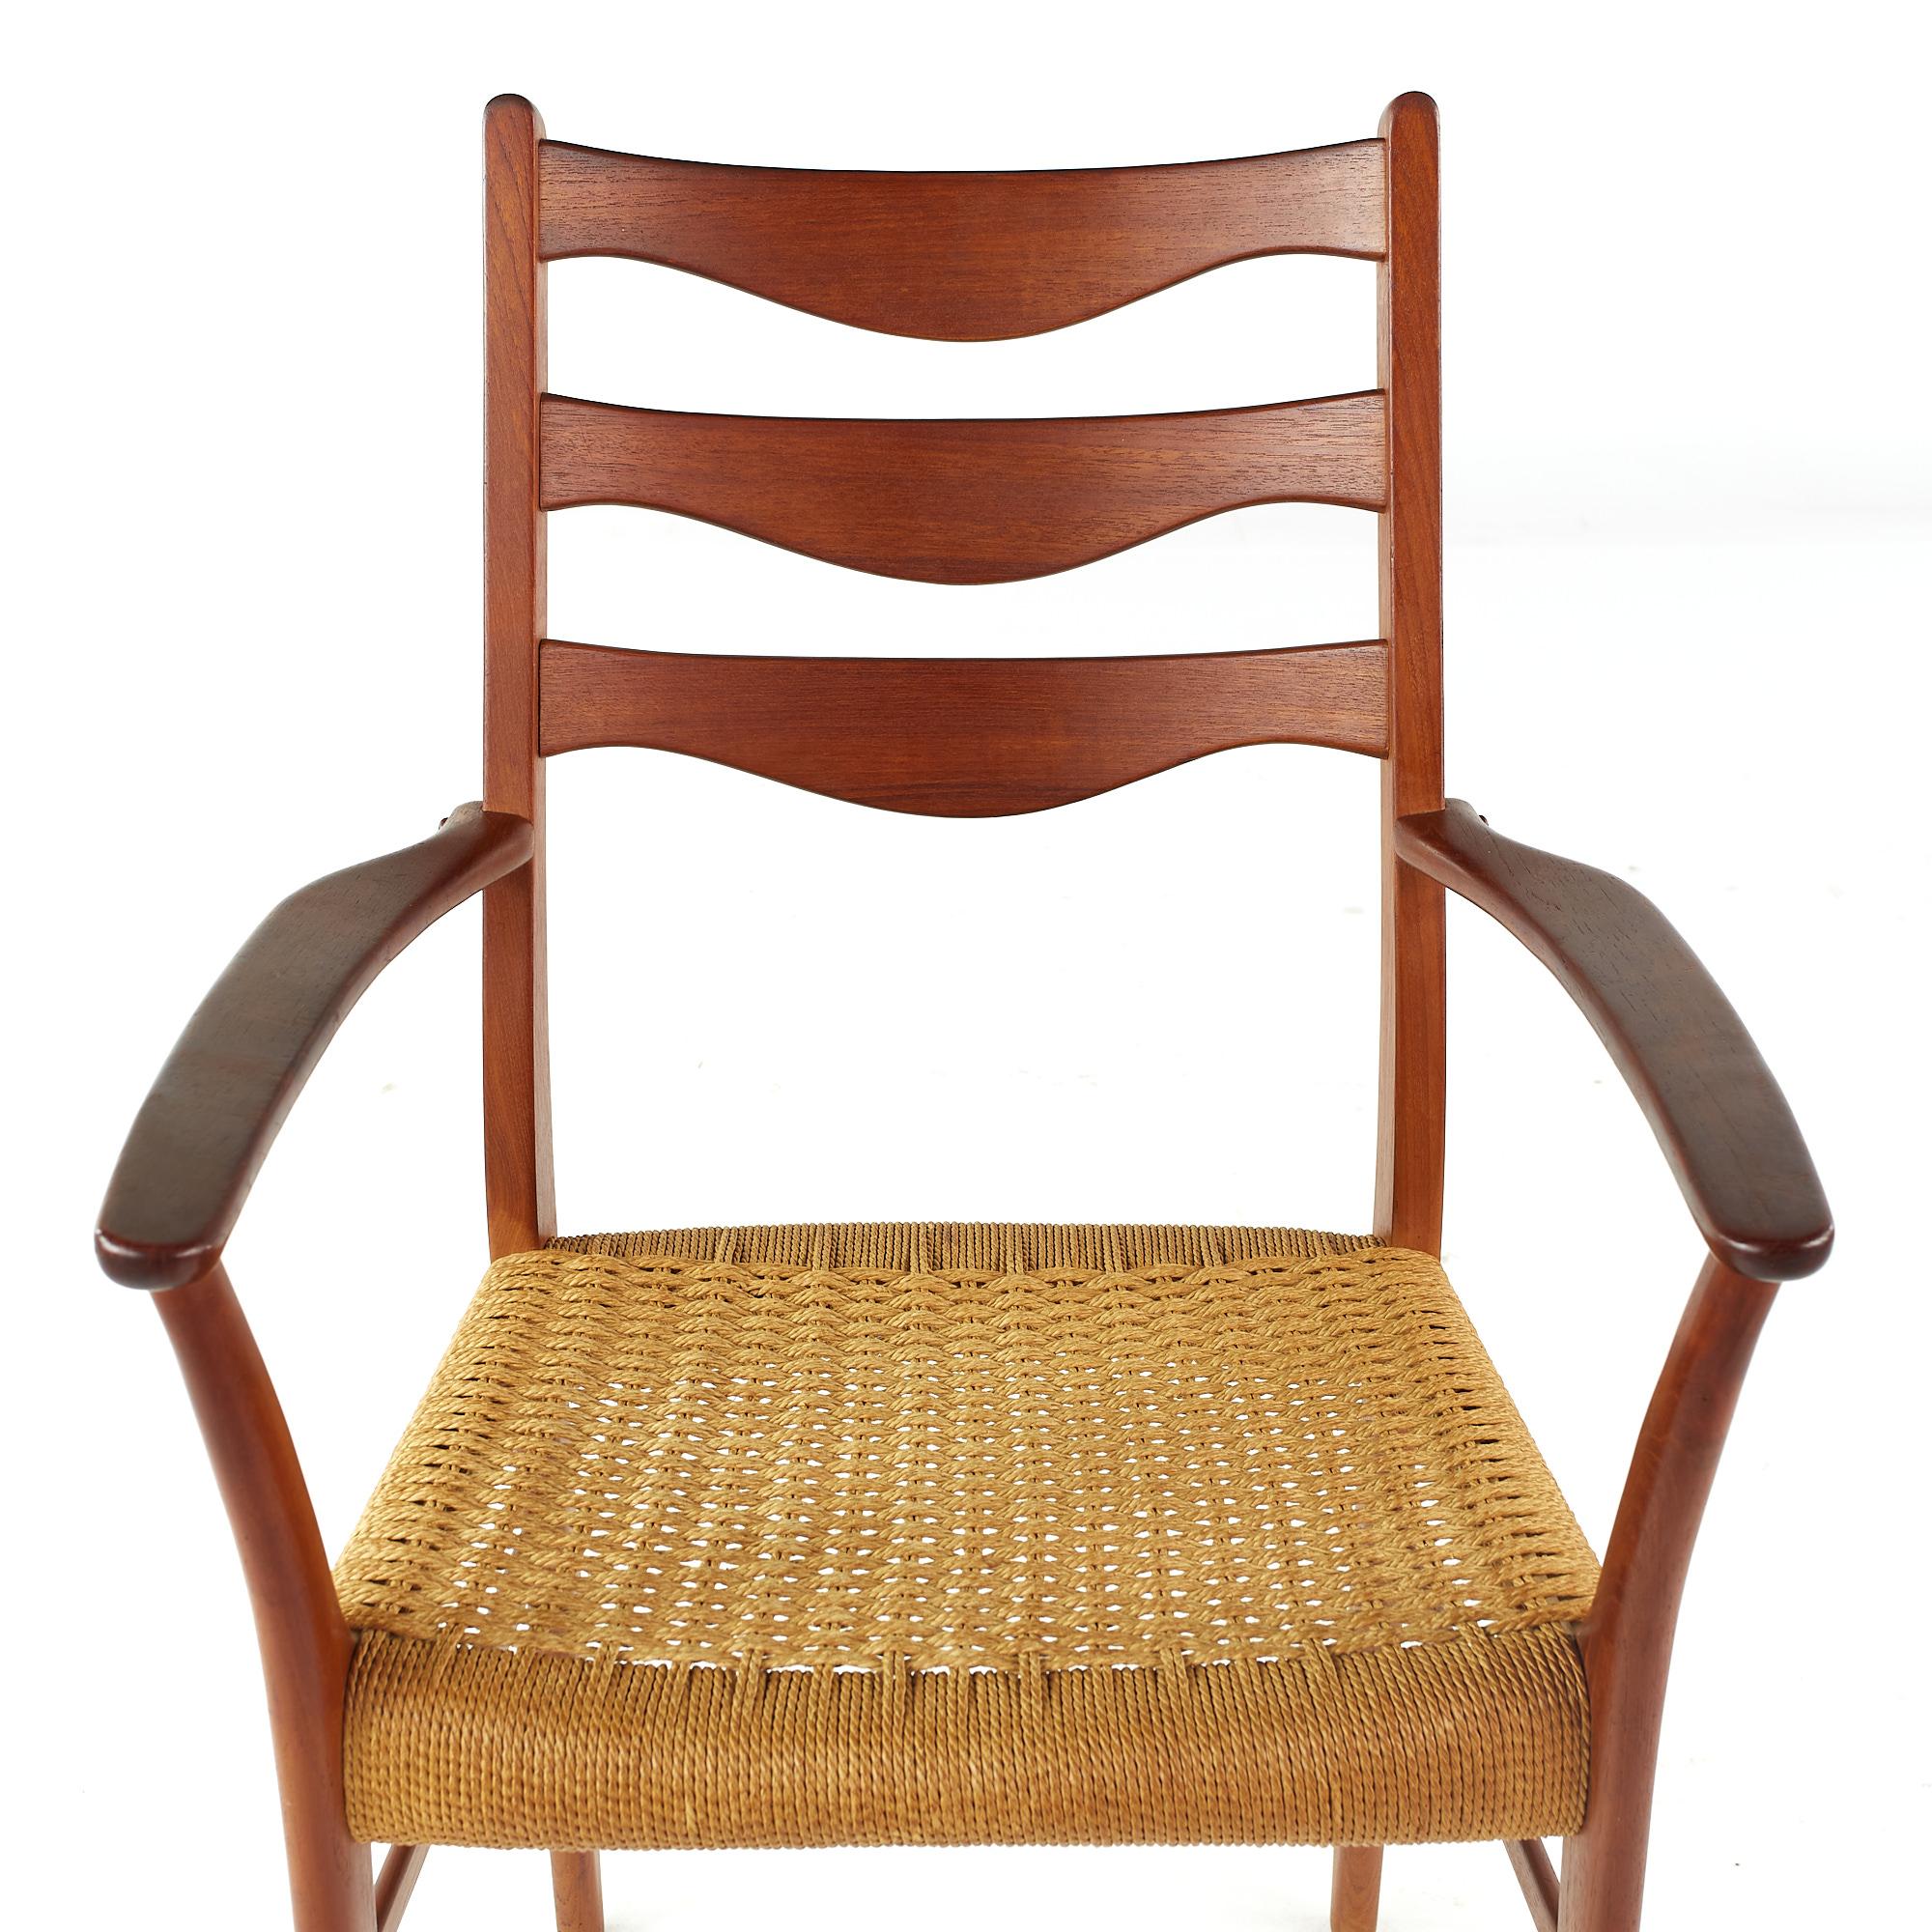 Arne Wahl Iversen GS90 MCM Danish Teak Dining Chairs with Rope Seats, Set of 6 For Sale 12